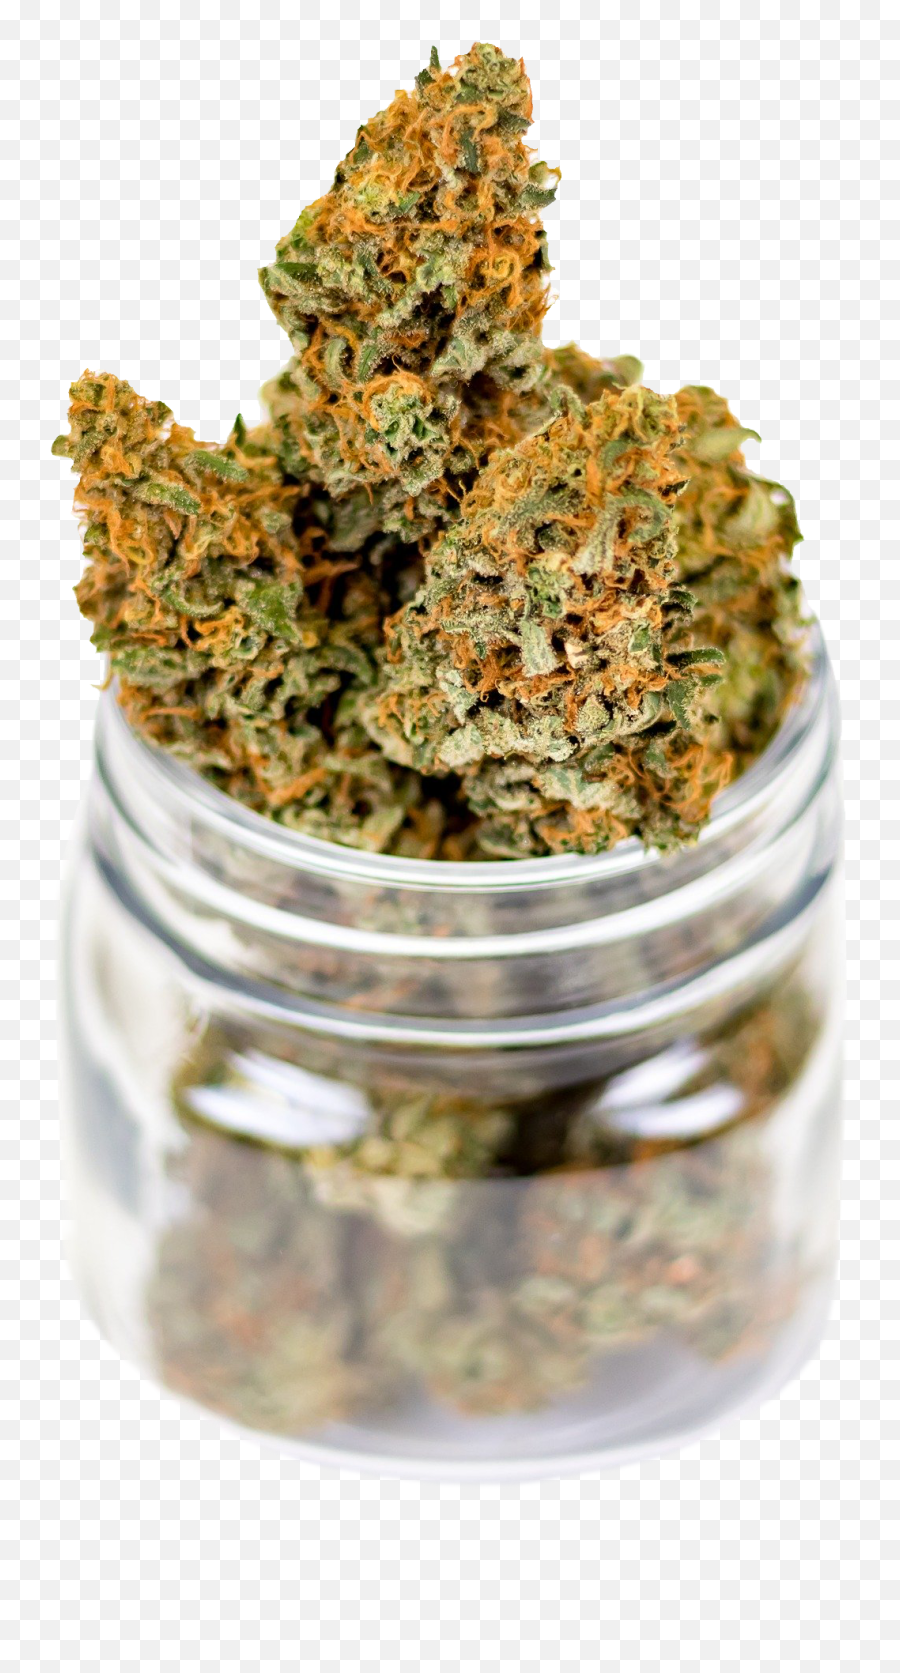 The Best Way To Store Marijuana Arch Advanced Pain Management - Fluffy Weed Emoji,Jar Png